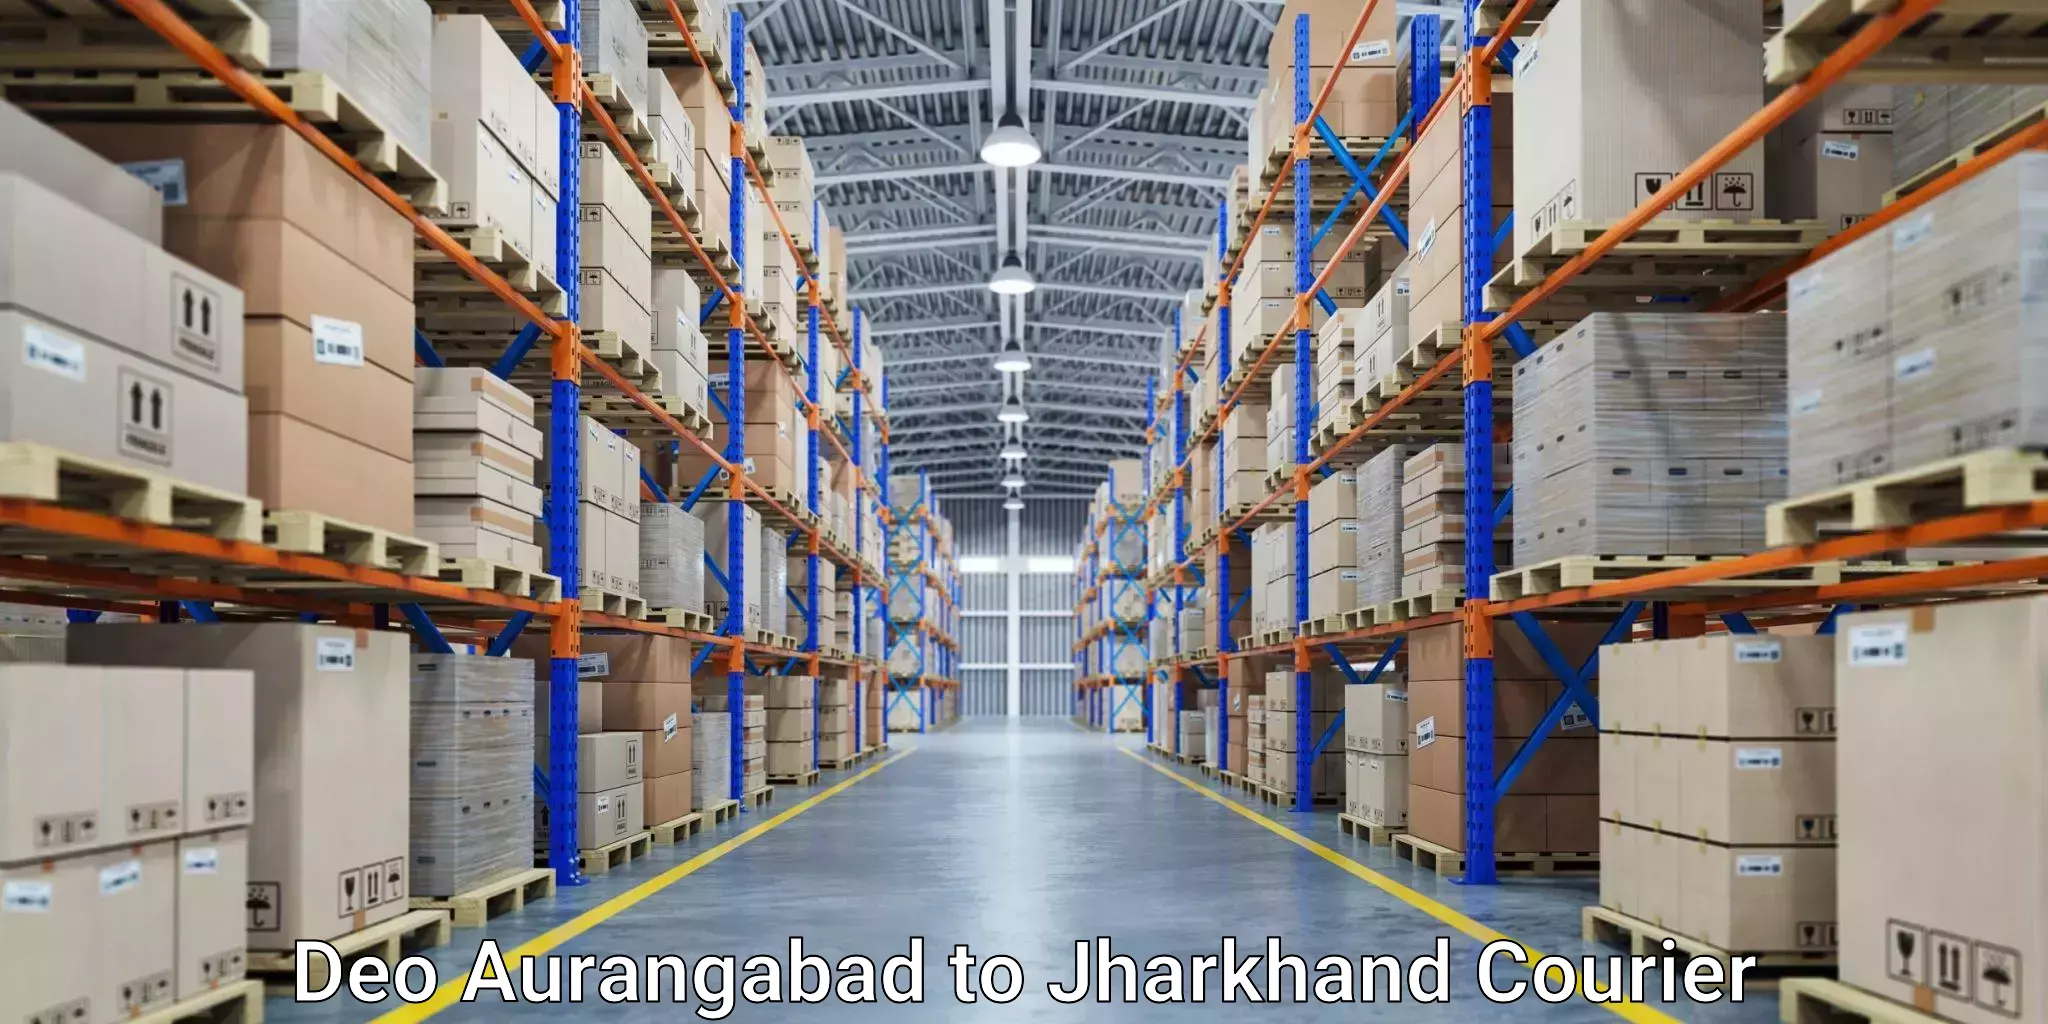 Round-the-clock parcel delivery Deo Aurangabad to Madhupur